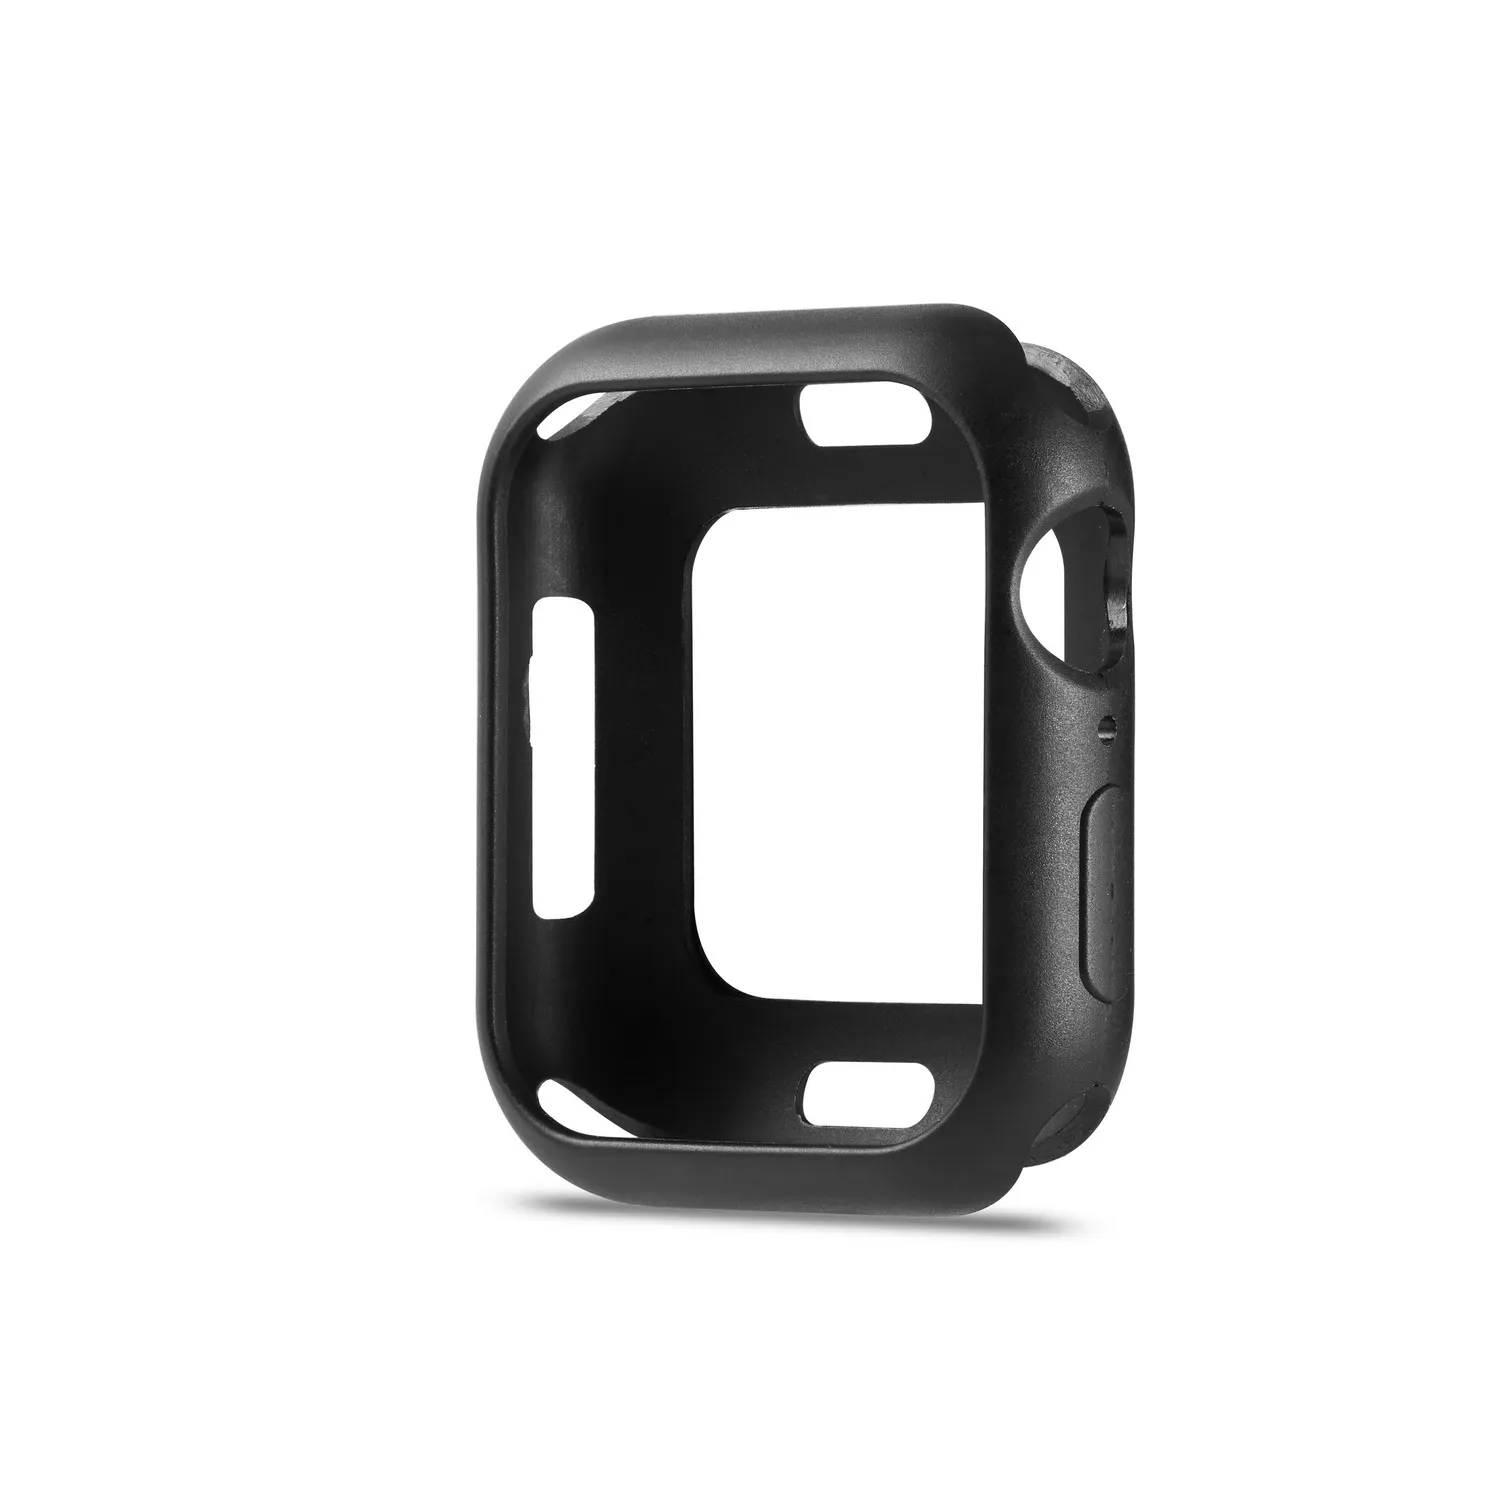 TPU Macaron Cover for Apple Watch 5 4 3 2 1 for Iwatch 44/40/42/38mm Screen Protector Watch Case Accessories - Цвет: Black